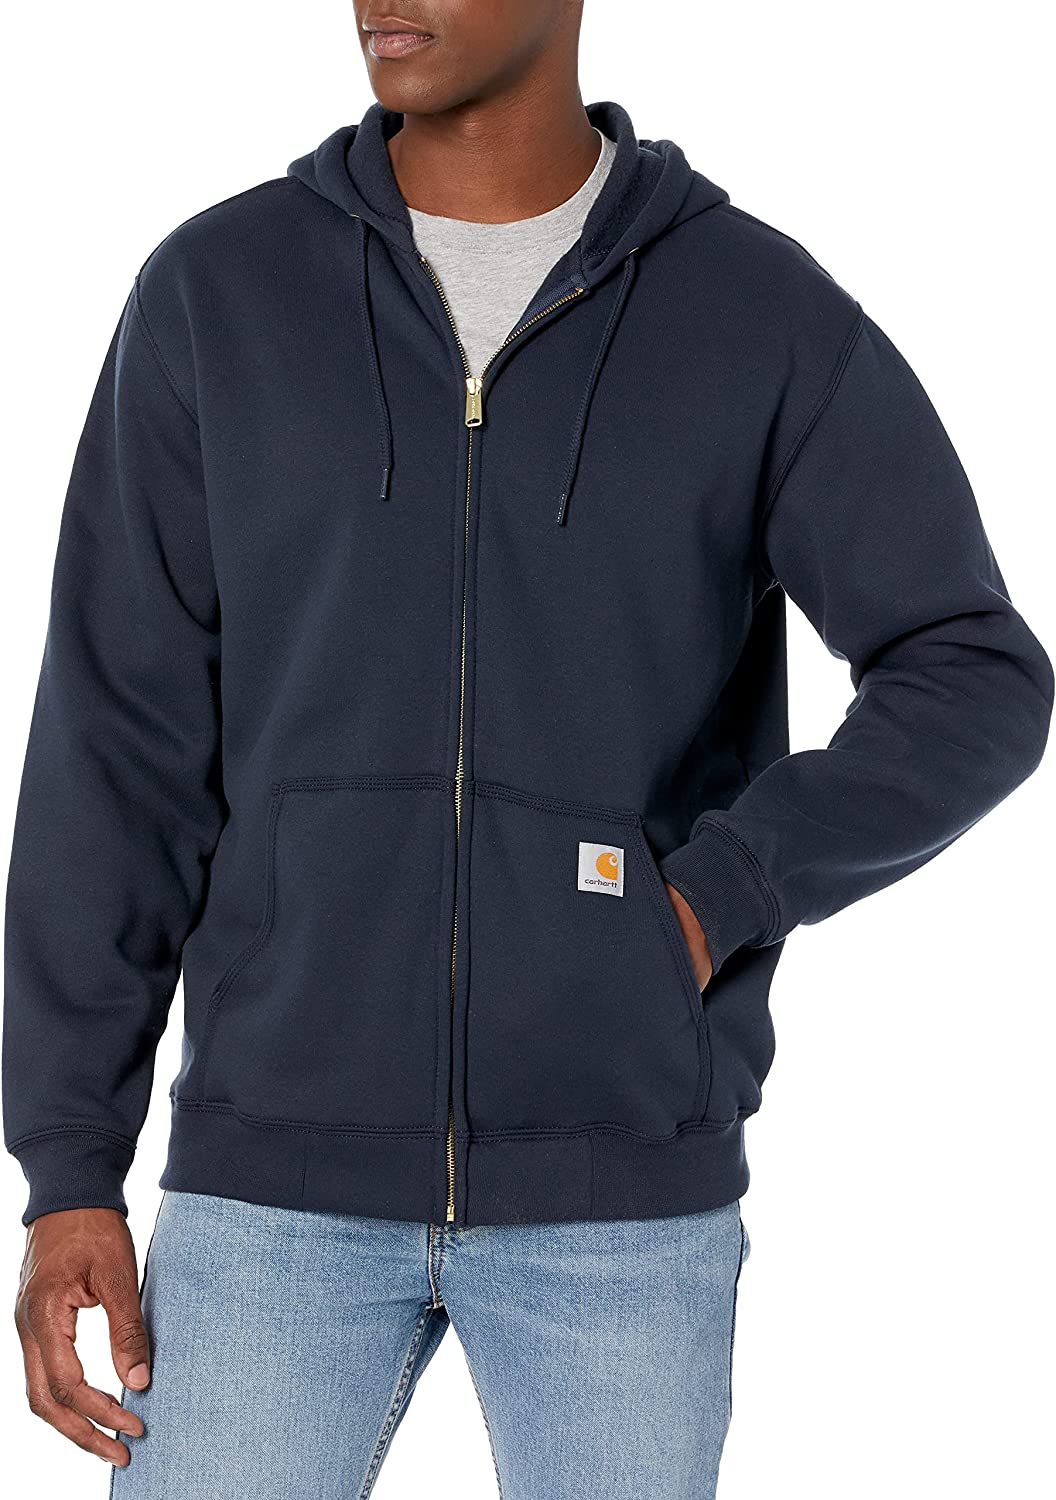 Carhartt Loose-Fit Midweight Hooded Pullover Sweatshirt for Men